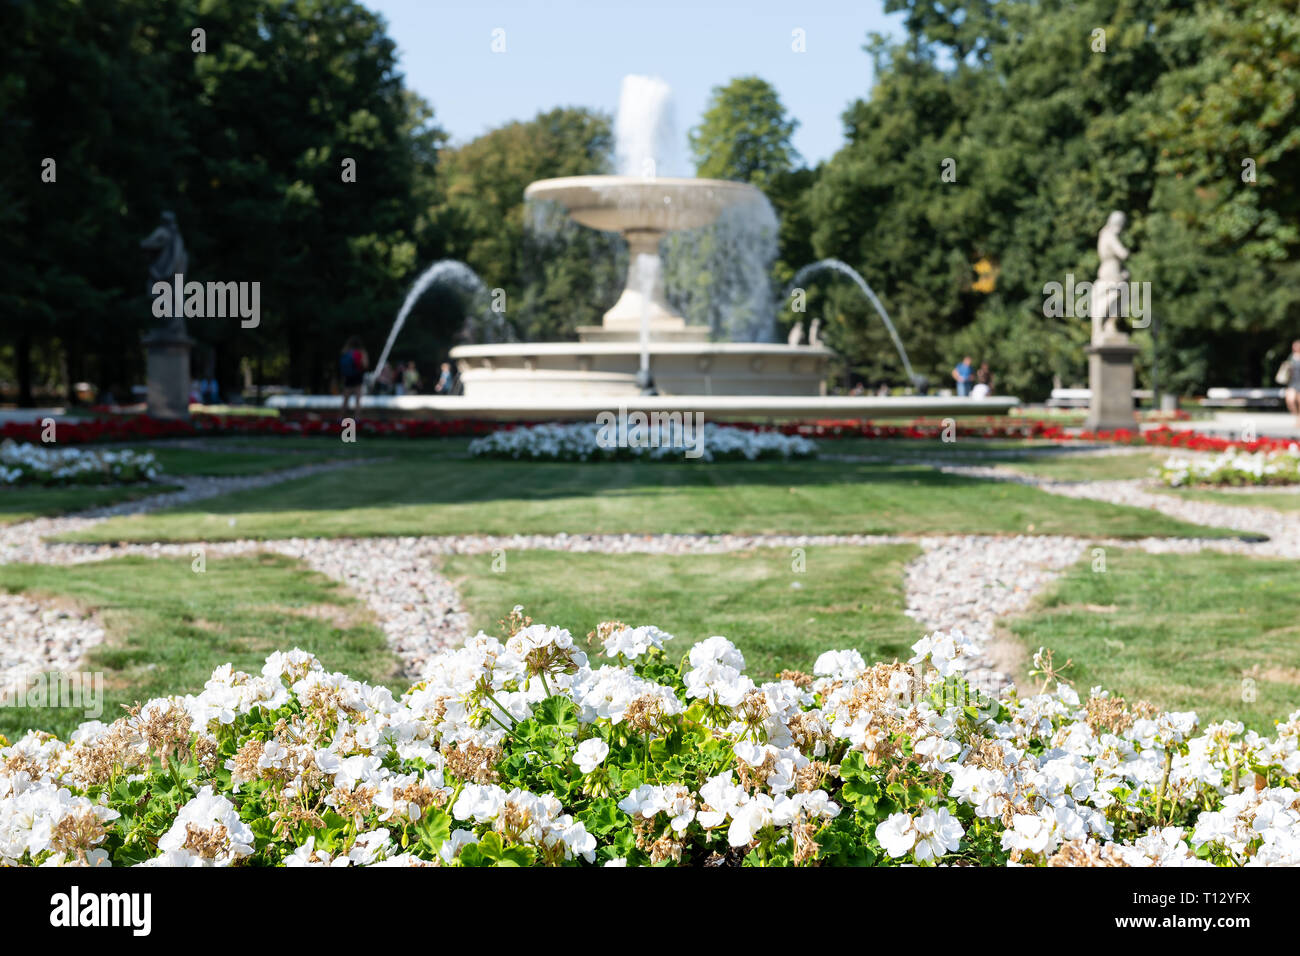 Warsaw, Poland tourists by water fountain in summer Saxon Gardens Park with spraying splashing sculptures and flower bed Stock Photo